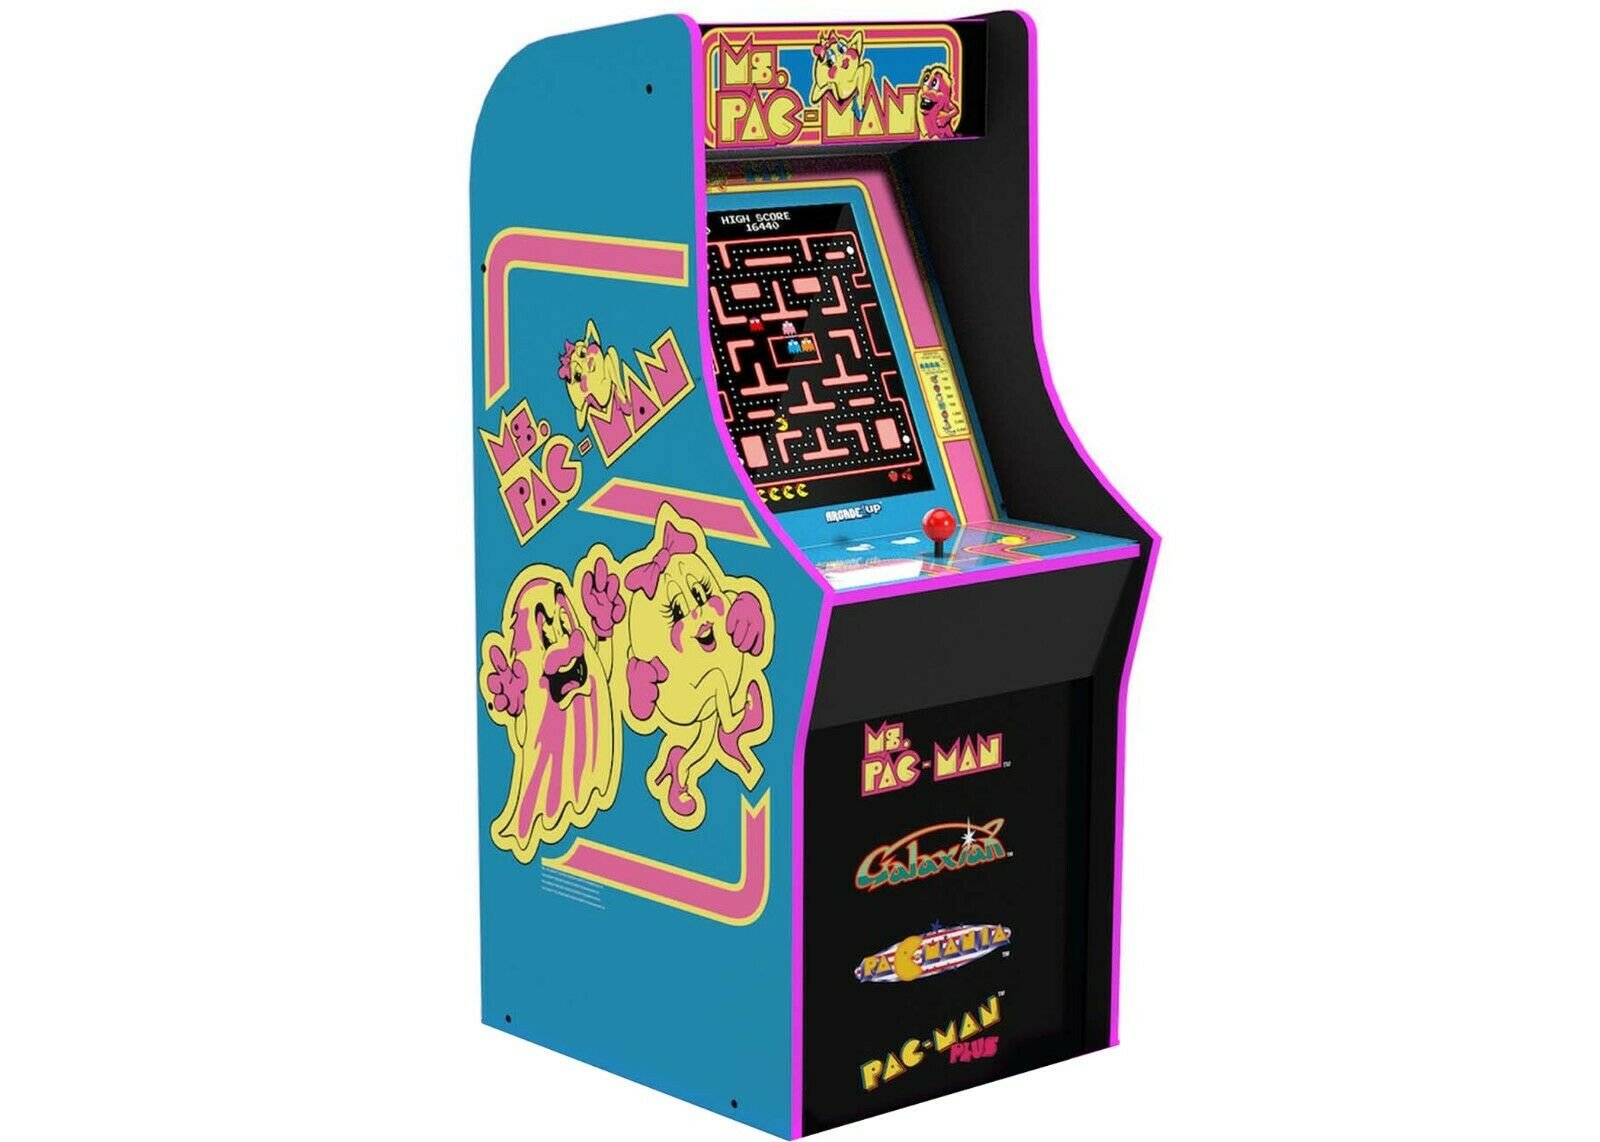 Arcade1Up, Ms. Pacman Arcade Machine with Riser - image 5 of 6